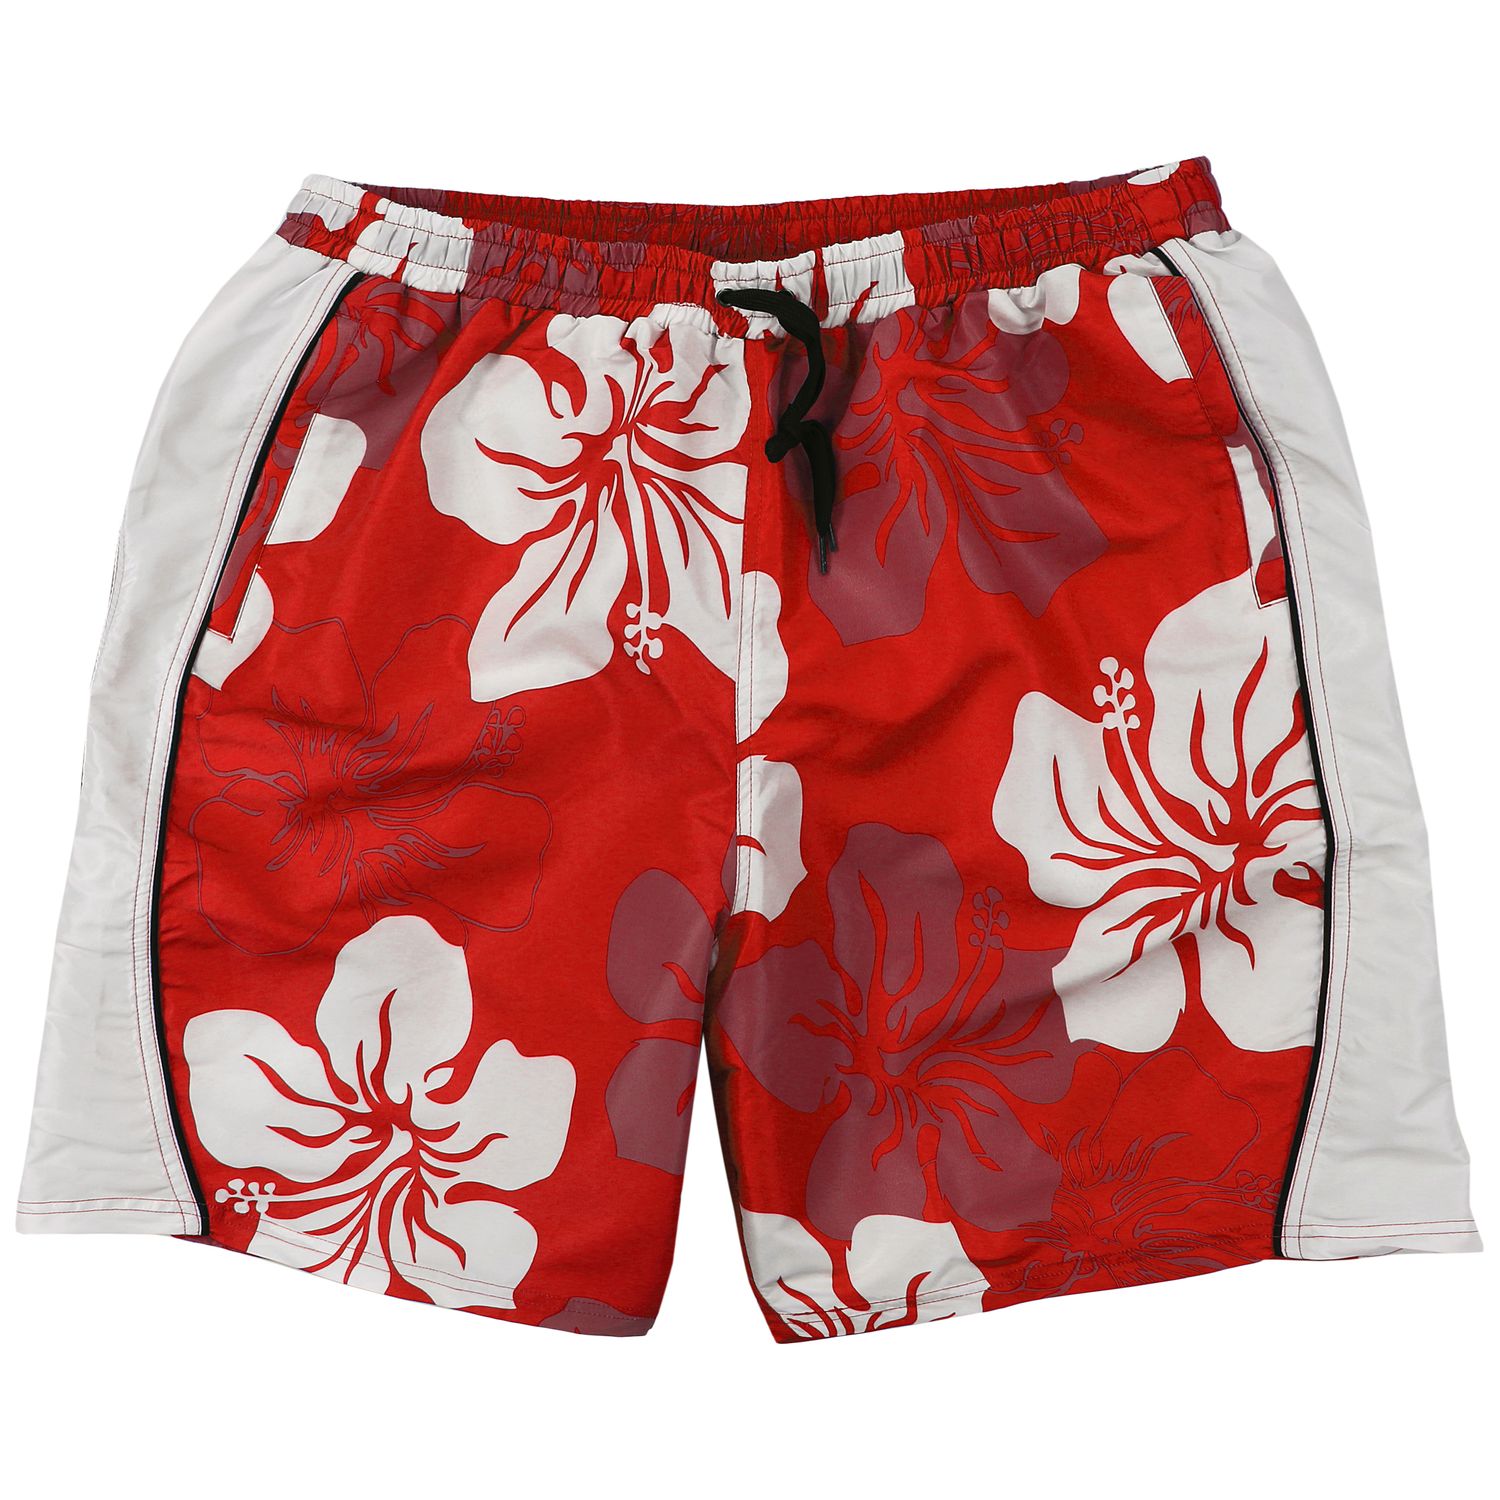 Bathing shorts by Abraxas for men red-white patterned in oversizes up to 10XL